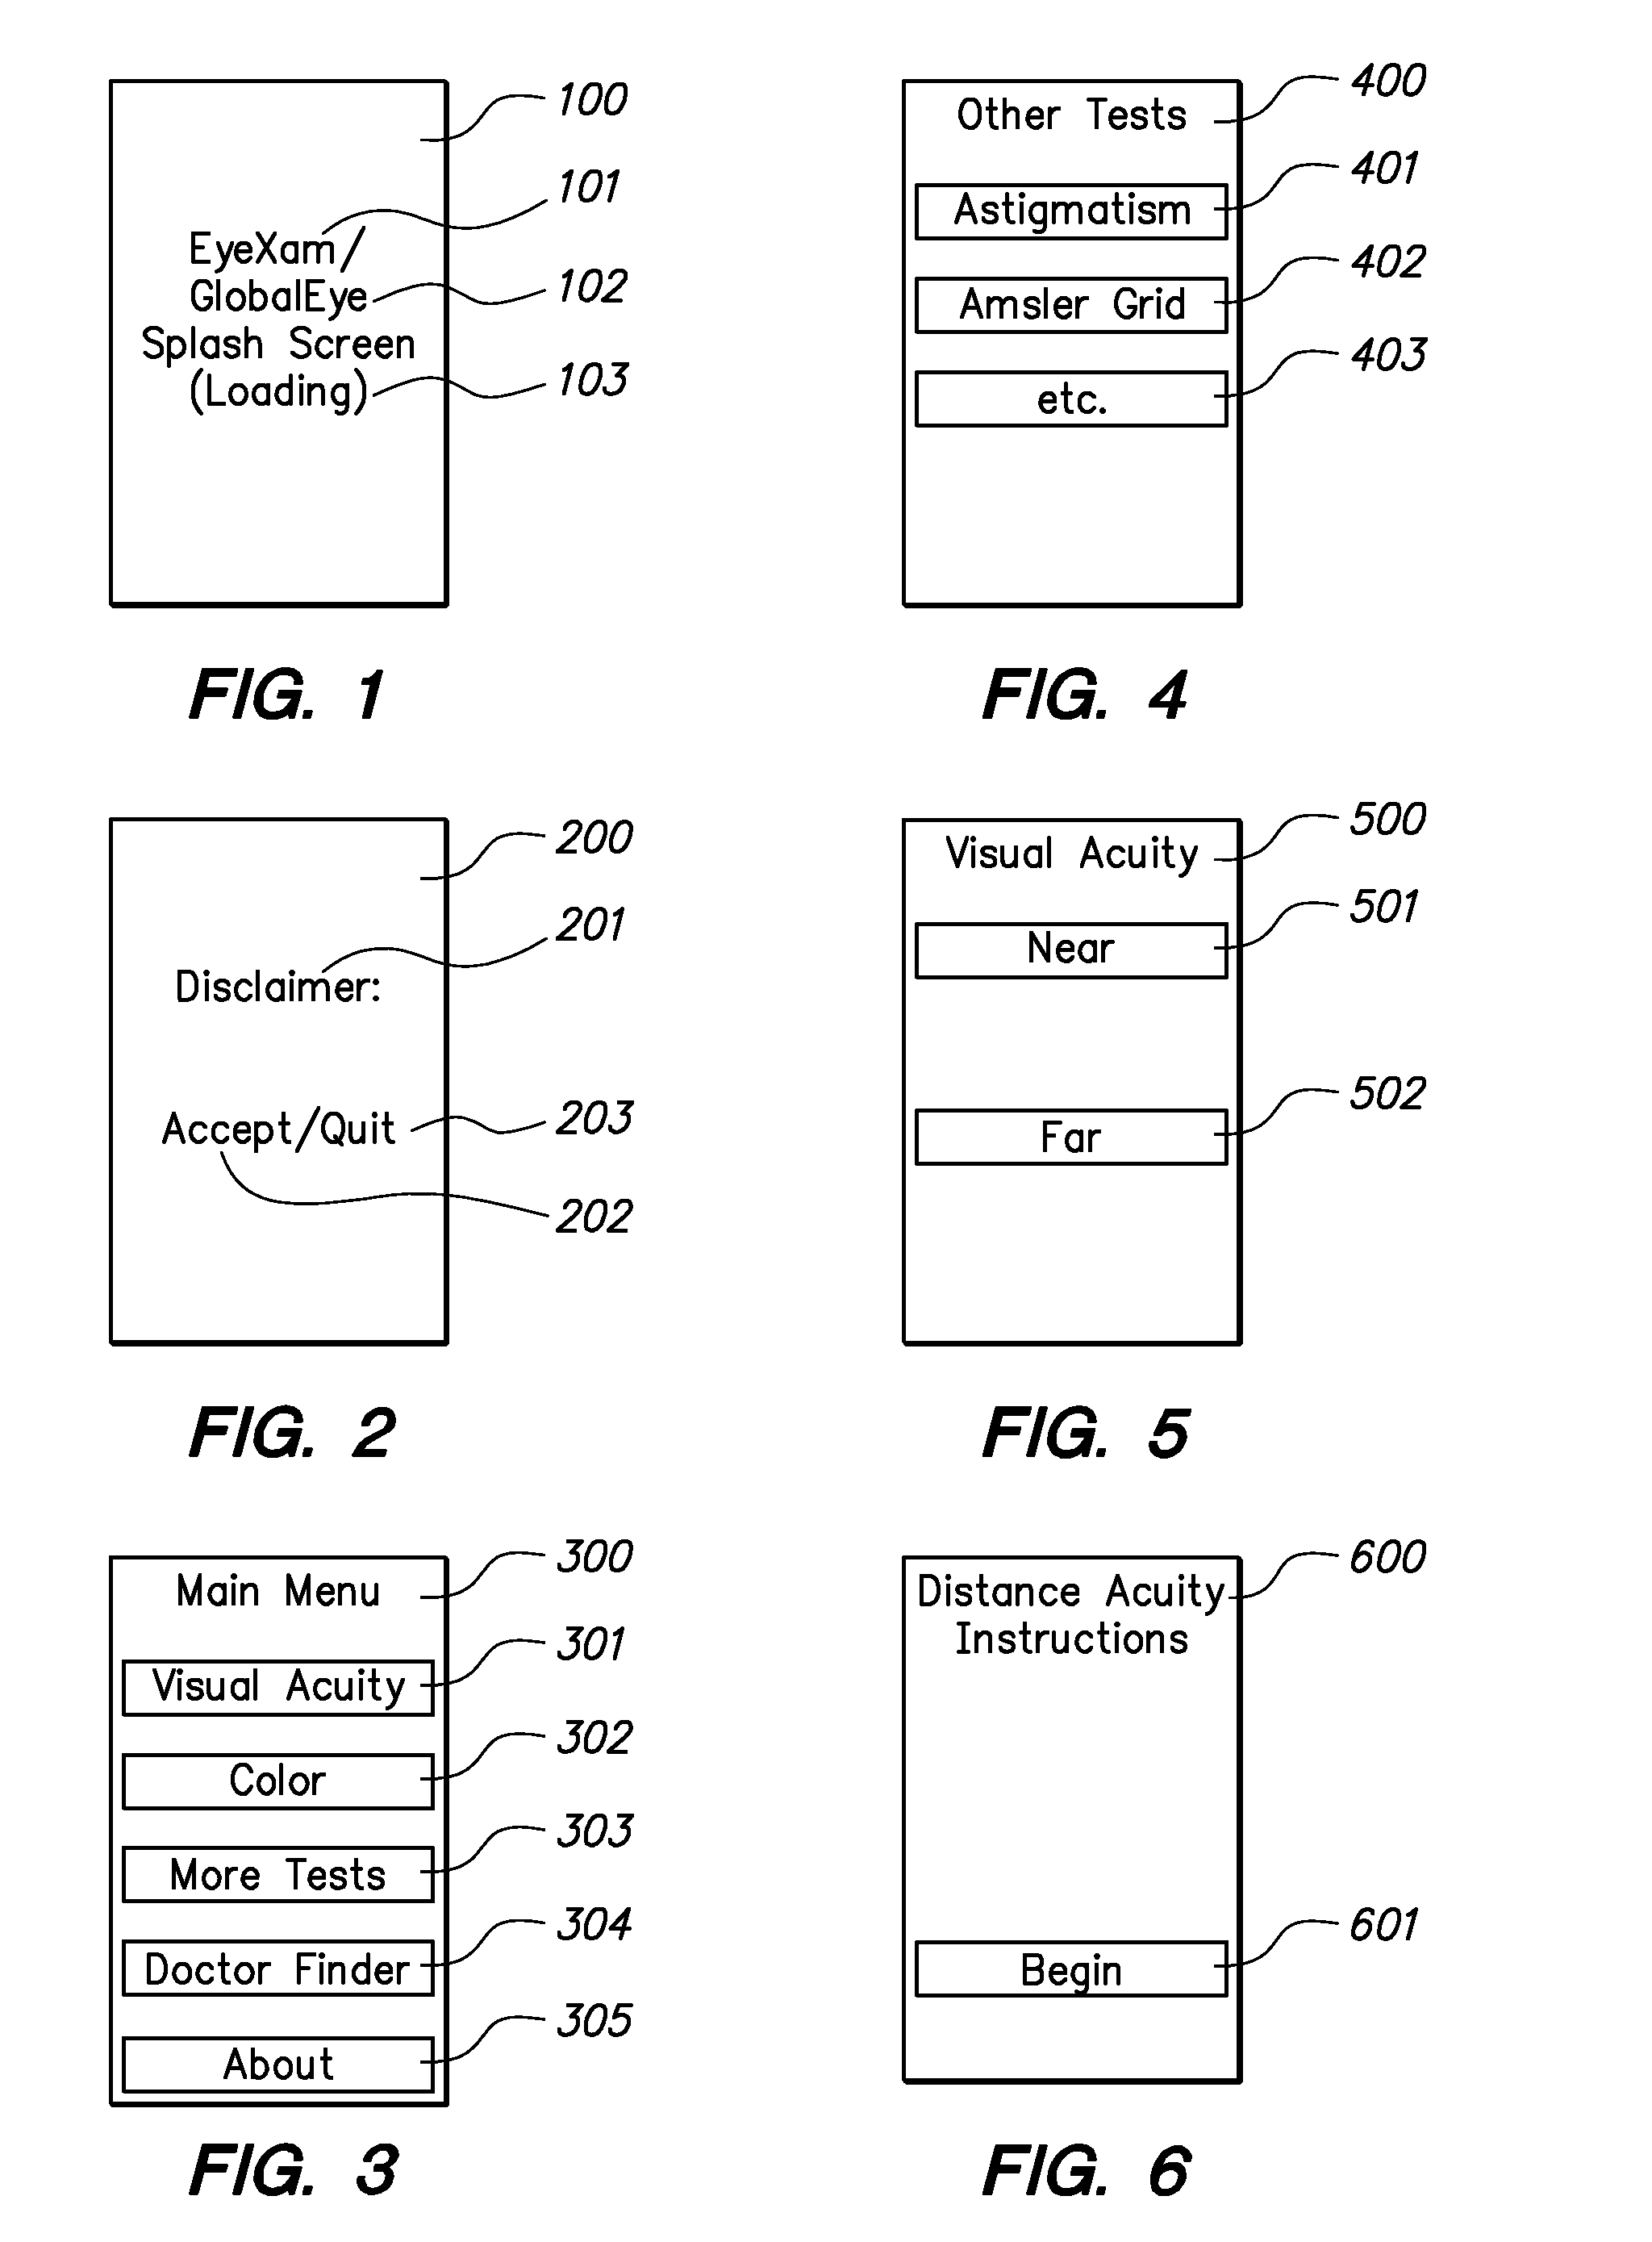 Method and System for Self-Administering a Visual Examination Using a Mobile Computing Device